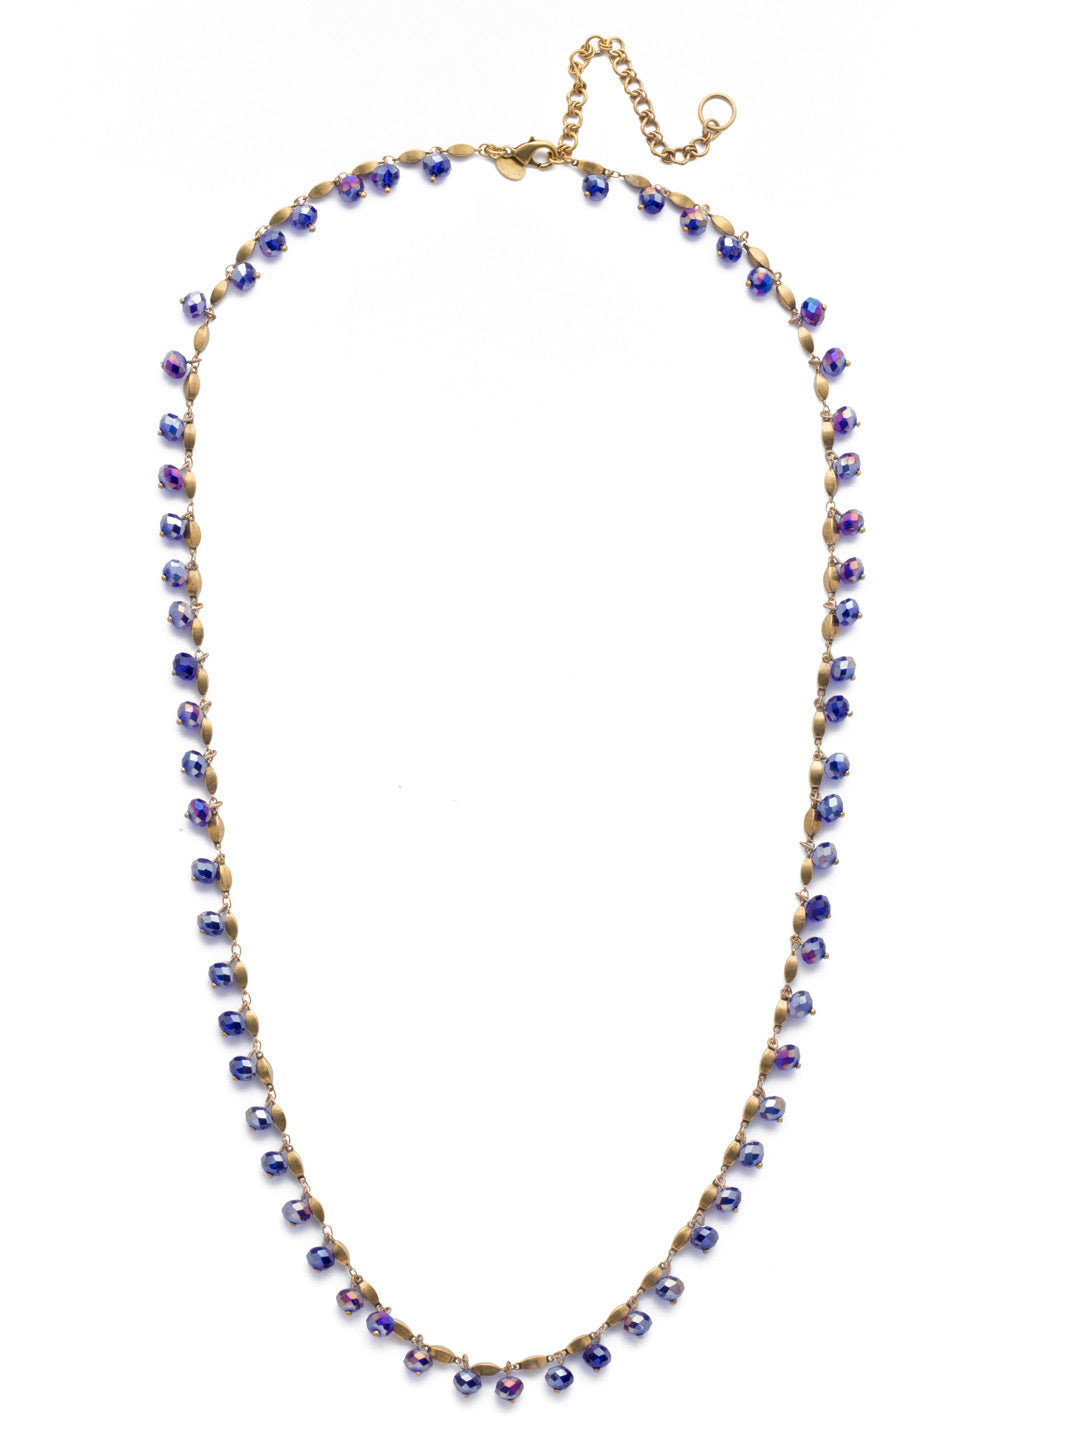 Marjorie Long Necklace - NEF35AGGOT - <p>This beaded beauty has delicately placed gems around the entire chain. This is the perfect necklace to showcase your own style and a great piece to add to your wardrobe. From Sorrelli's Game of Jewel Tones collection in our Antique Gold-tone finish.</p>